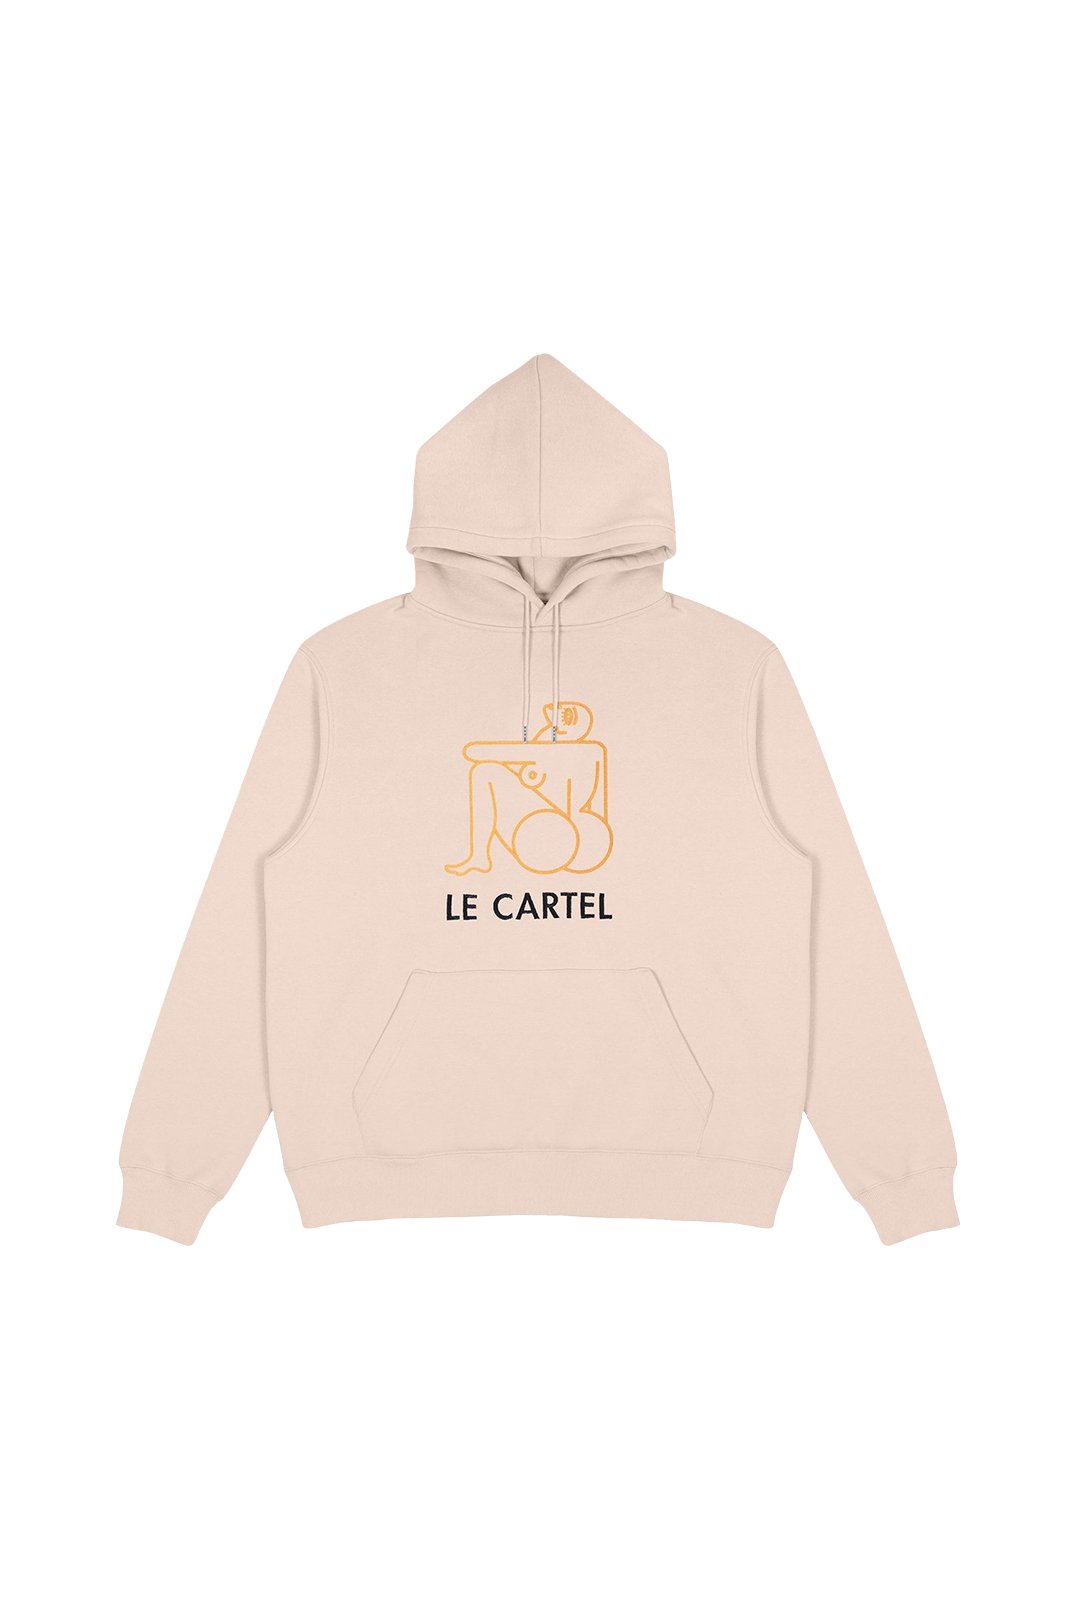 BOOTY CALL・Hoodie unisexe・Sable - Le Cartel